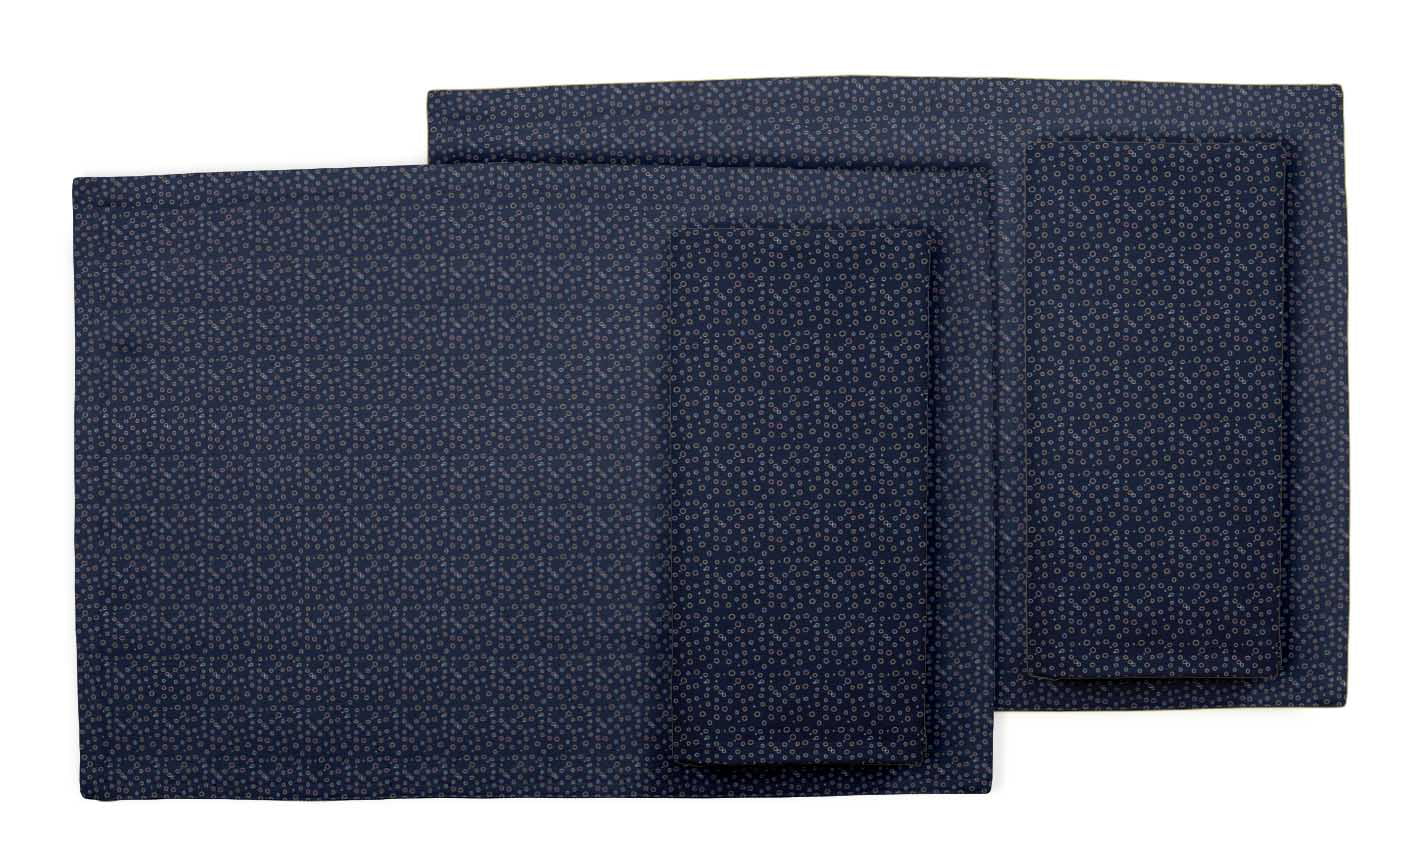 Details about   S4Sassy Bold Line Geometric Placemats & Napkins Table Decor Dining Mats-GMD-639D 